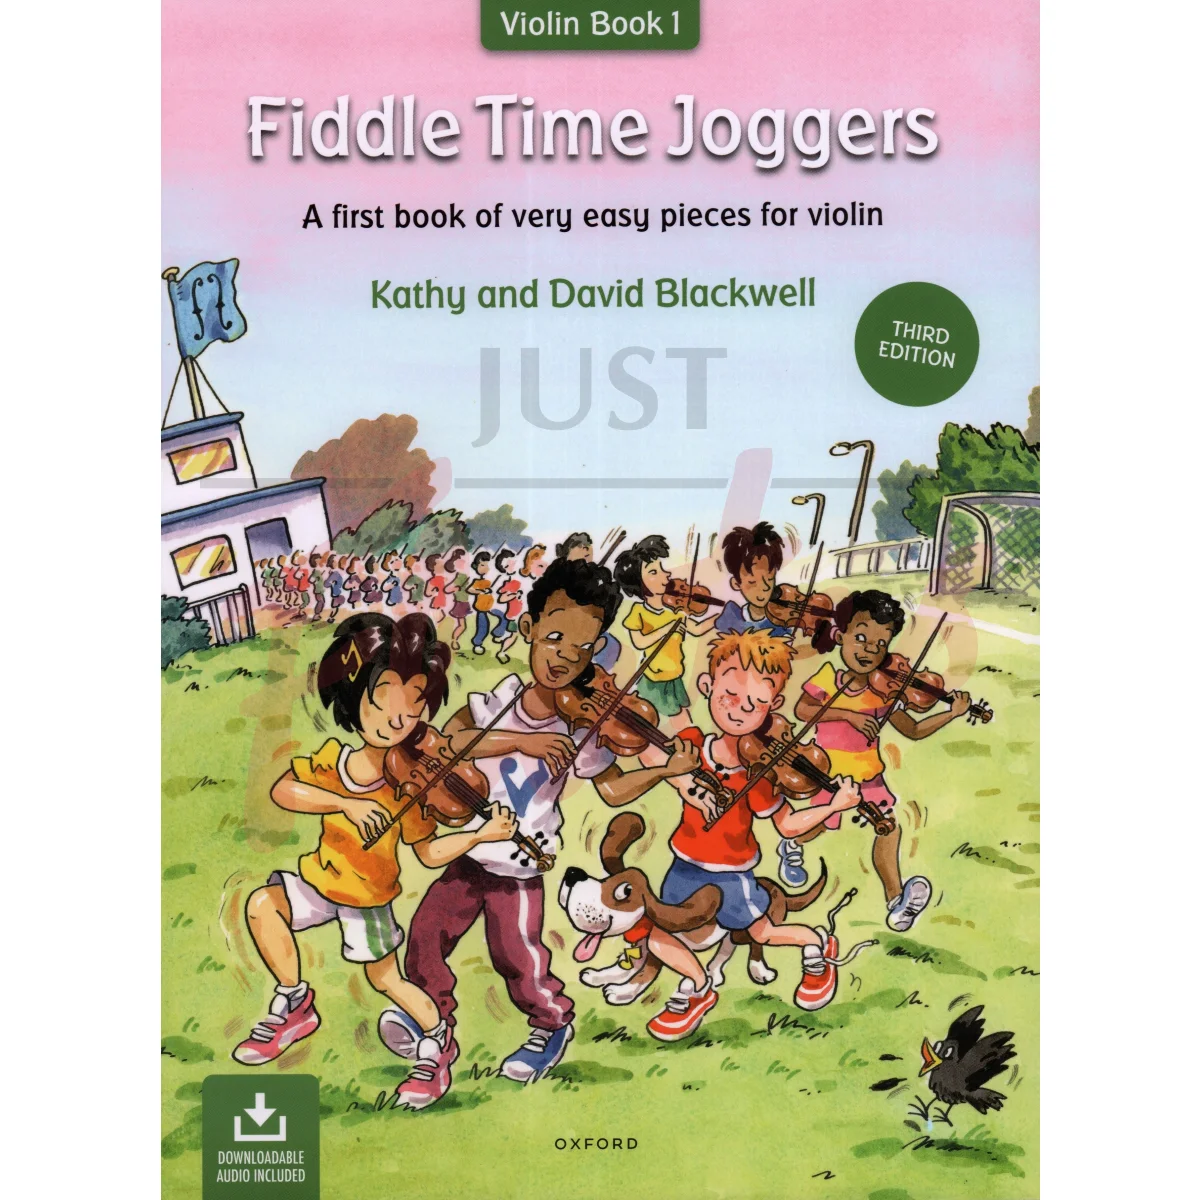 Fiddle Time Joggers for Violin [Third Edition]